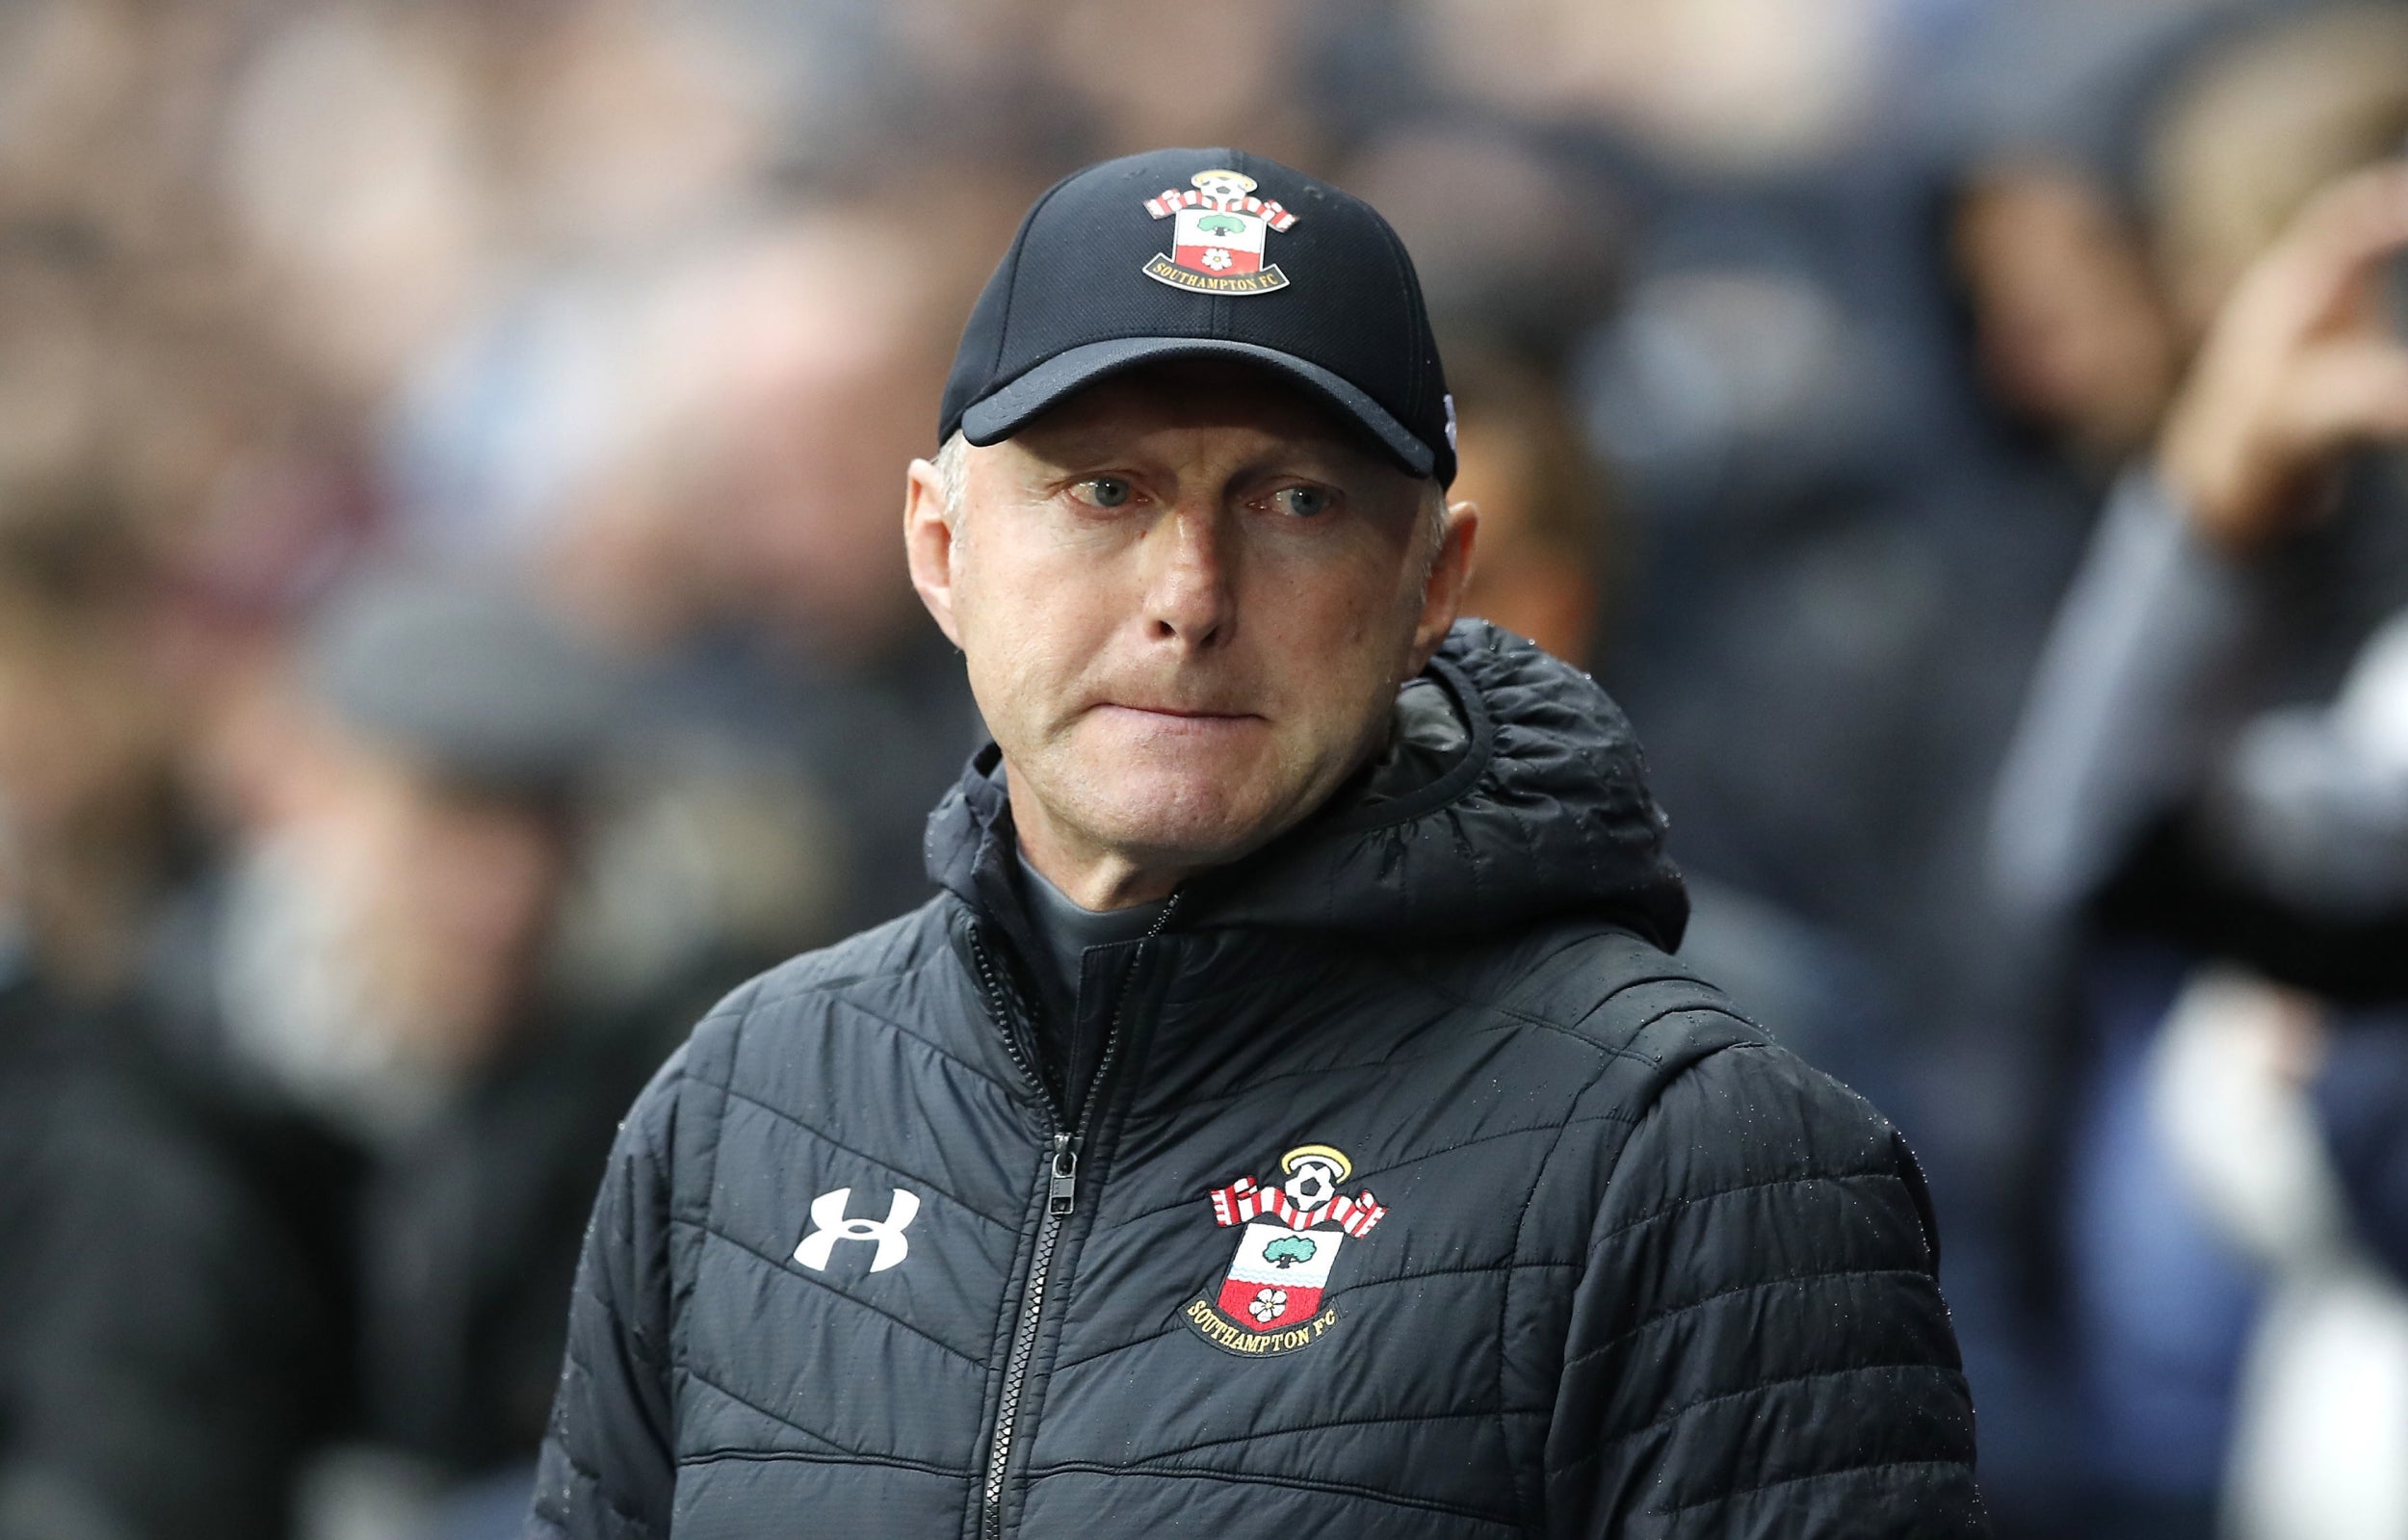 Southampton take on Tottenham in north London for a place in the fifth round